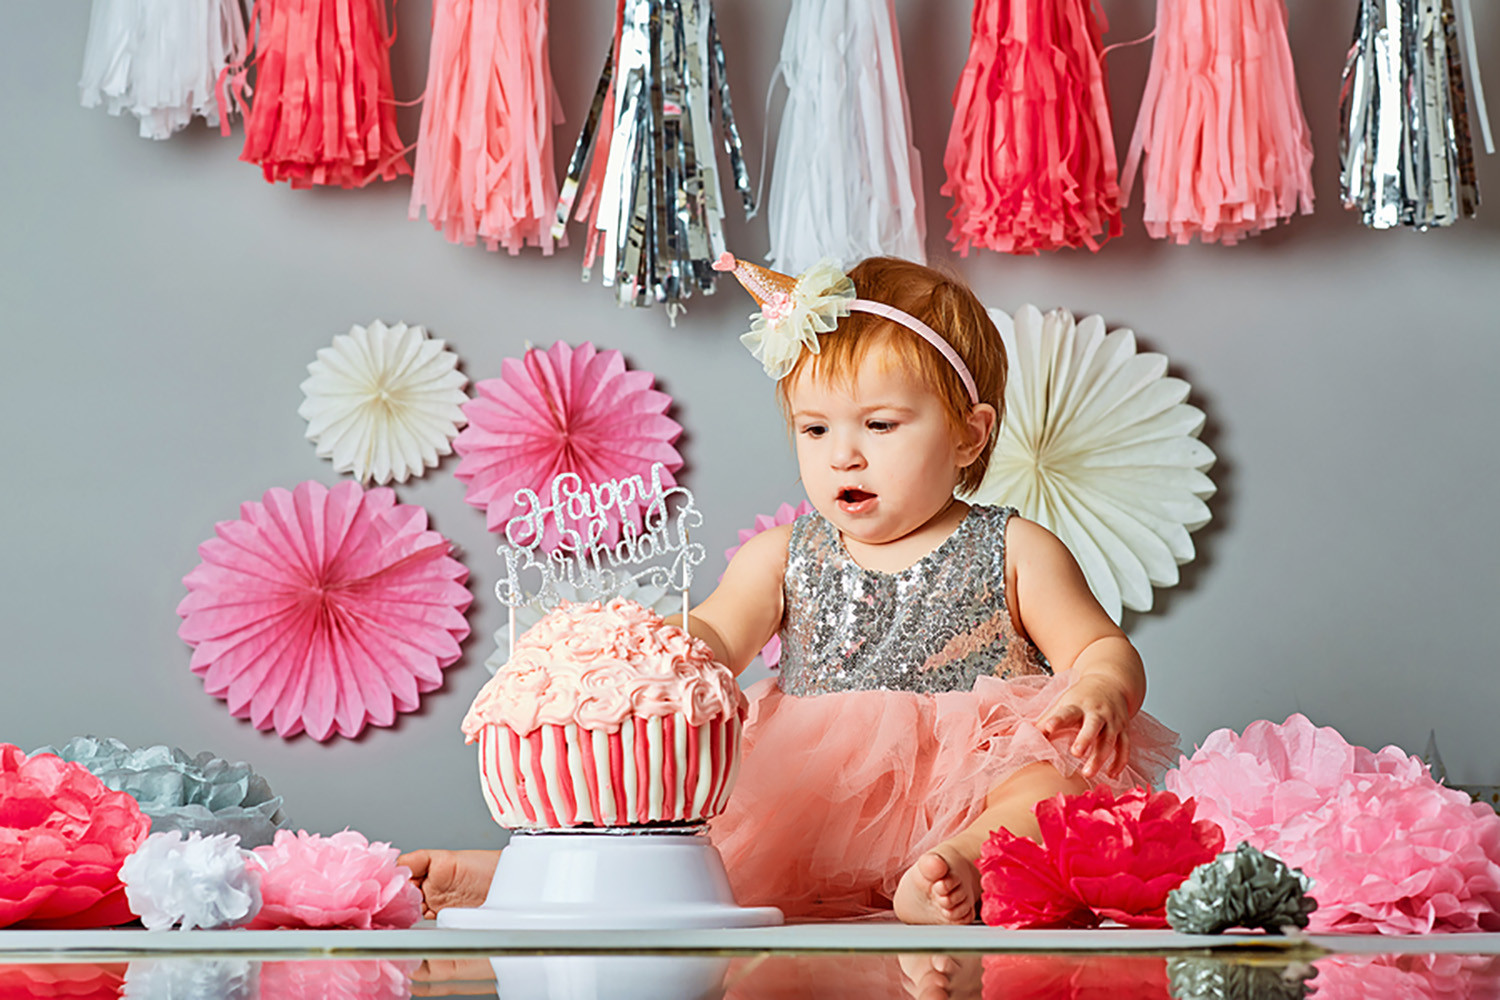 Birthday Gift Ideas For Baby Girl
 Baby s 1st Birthday Gifts & Party Ideas for Boys & Girls